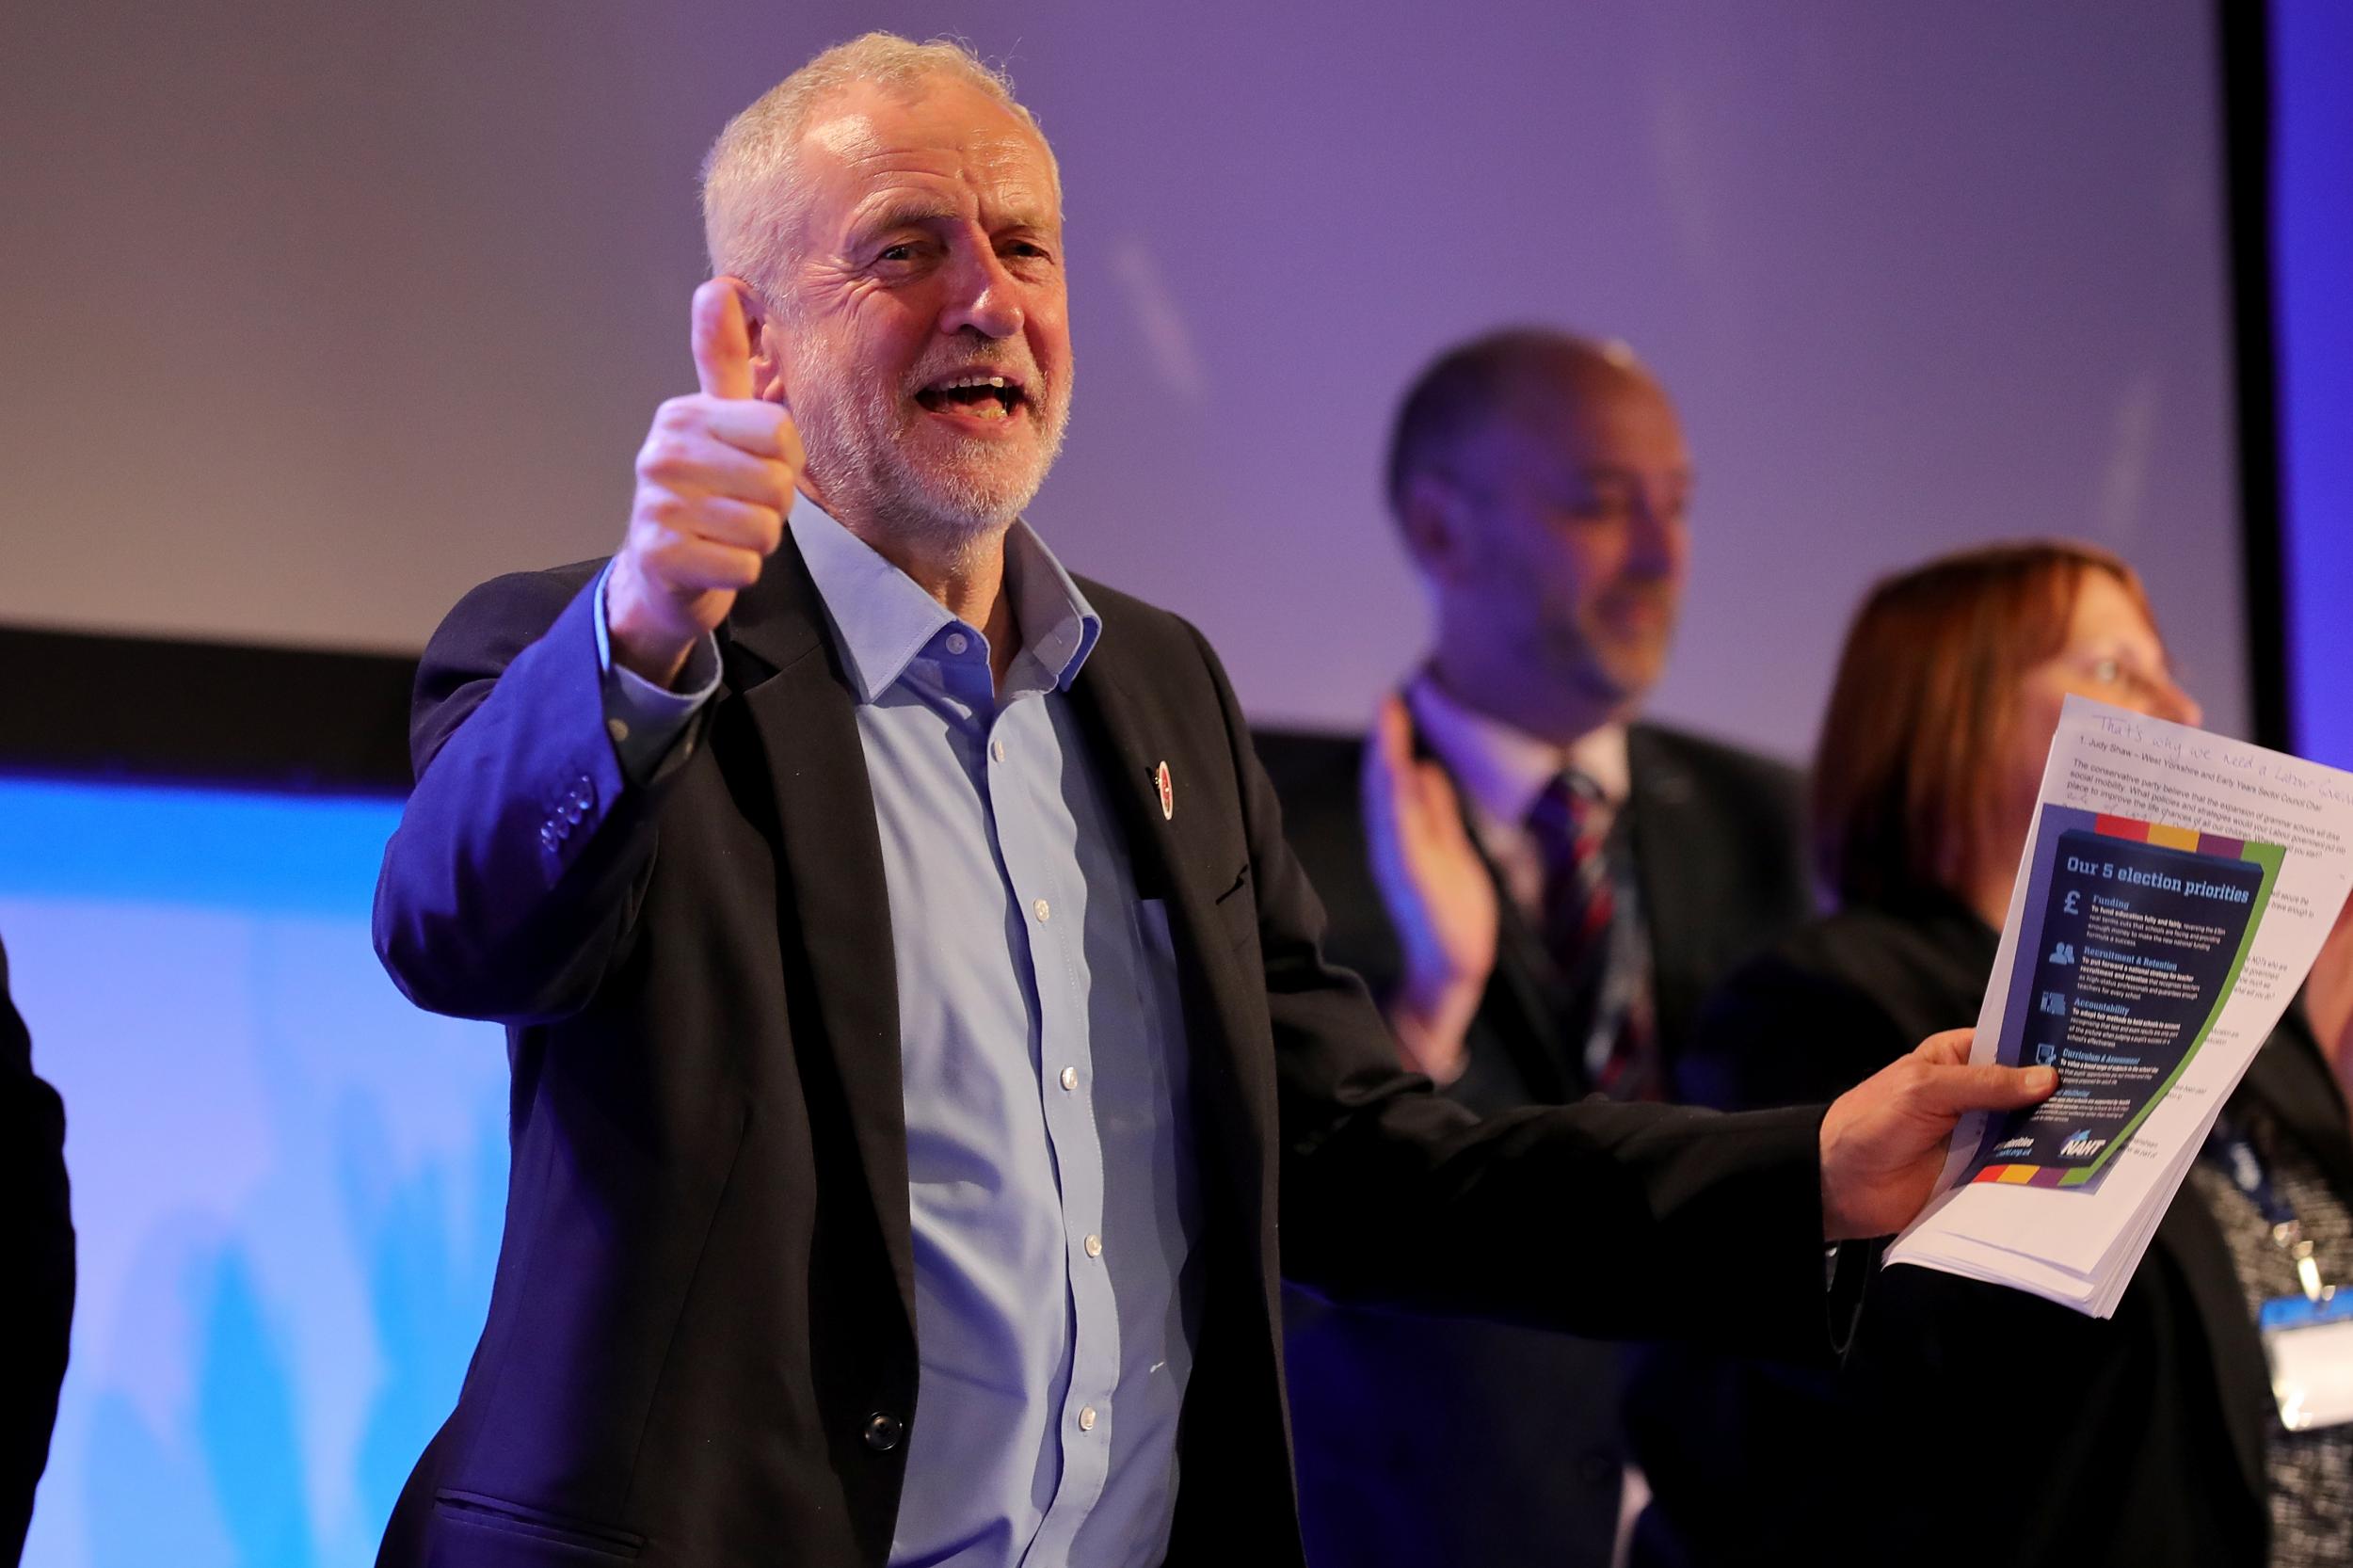 Labour leader Jeremy Corbyn is to make the police numbers pledge on Tuesday